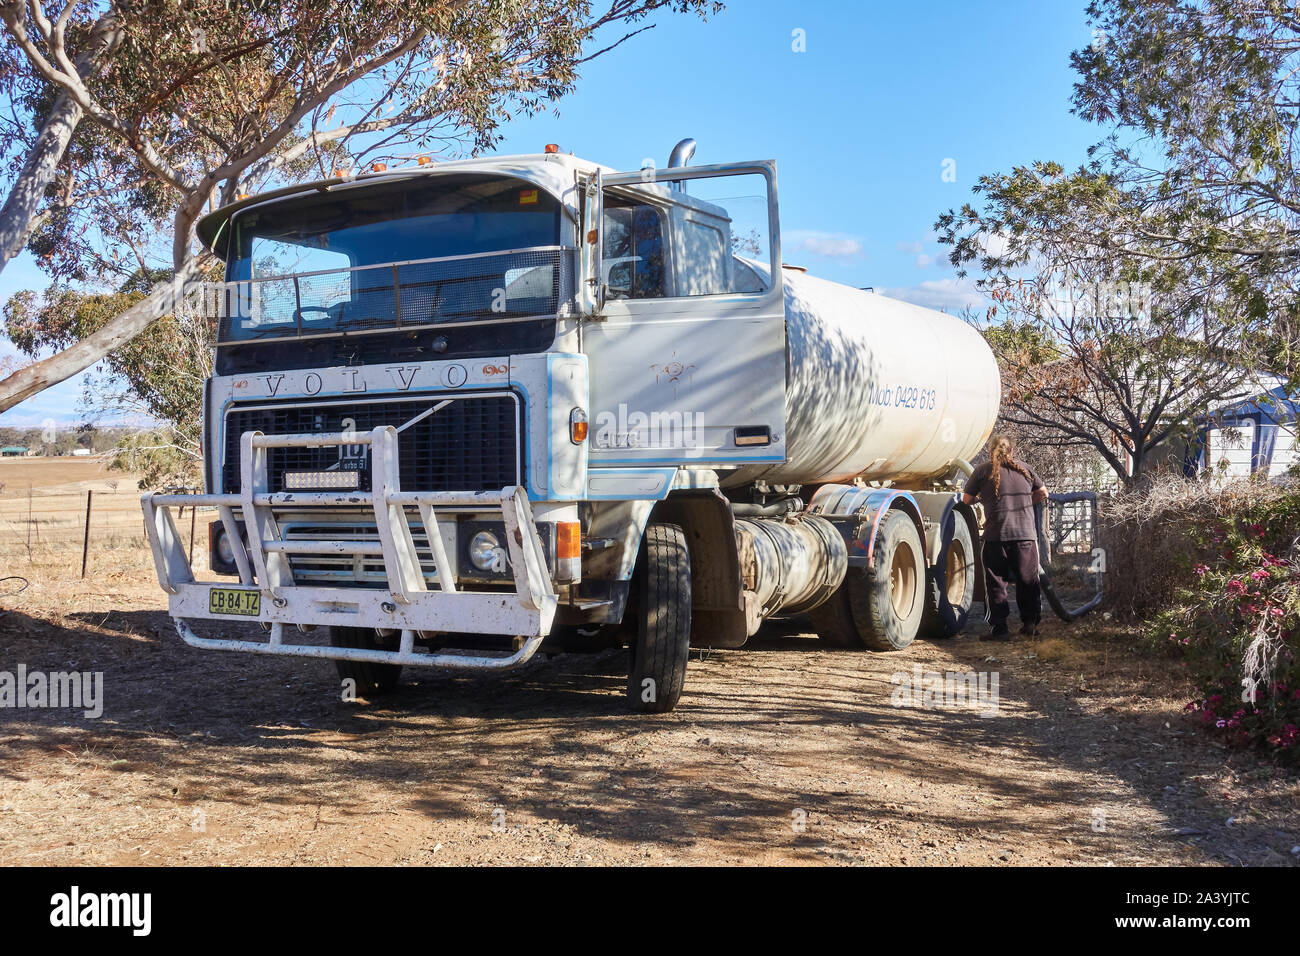 c 1980 Volvo F1023 10 litre 6 cylinder turbocharged diesel truck delivering 13,500 litres/3500 US gallons  of domestic water to a farm residence. Stock Photo